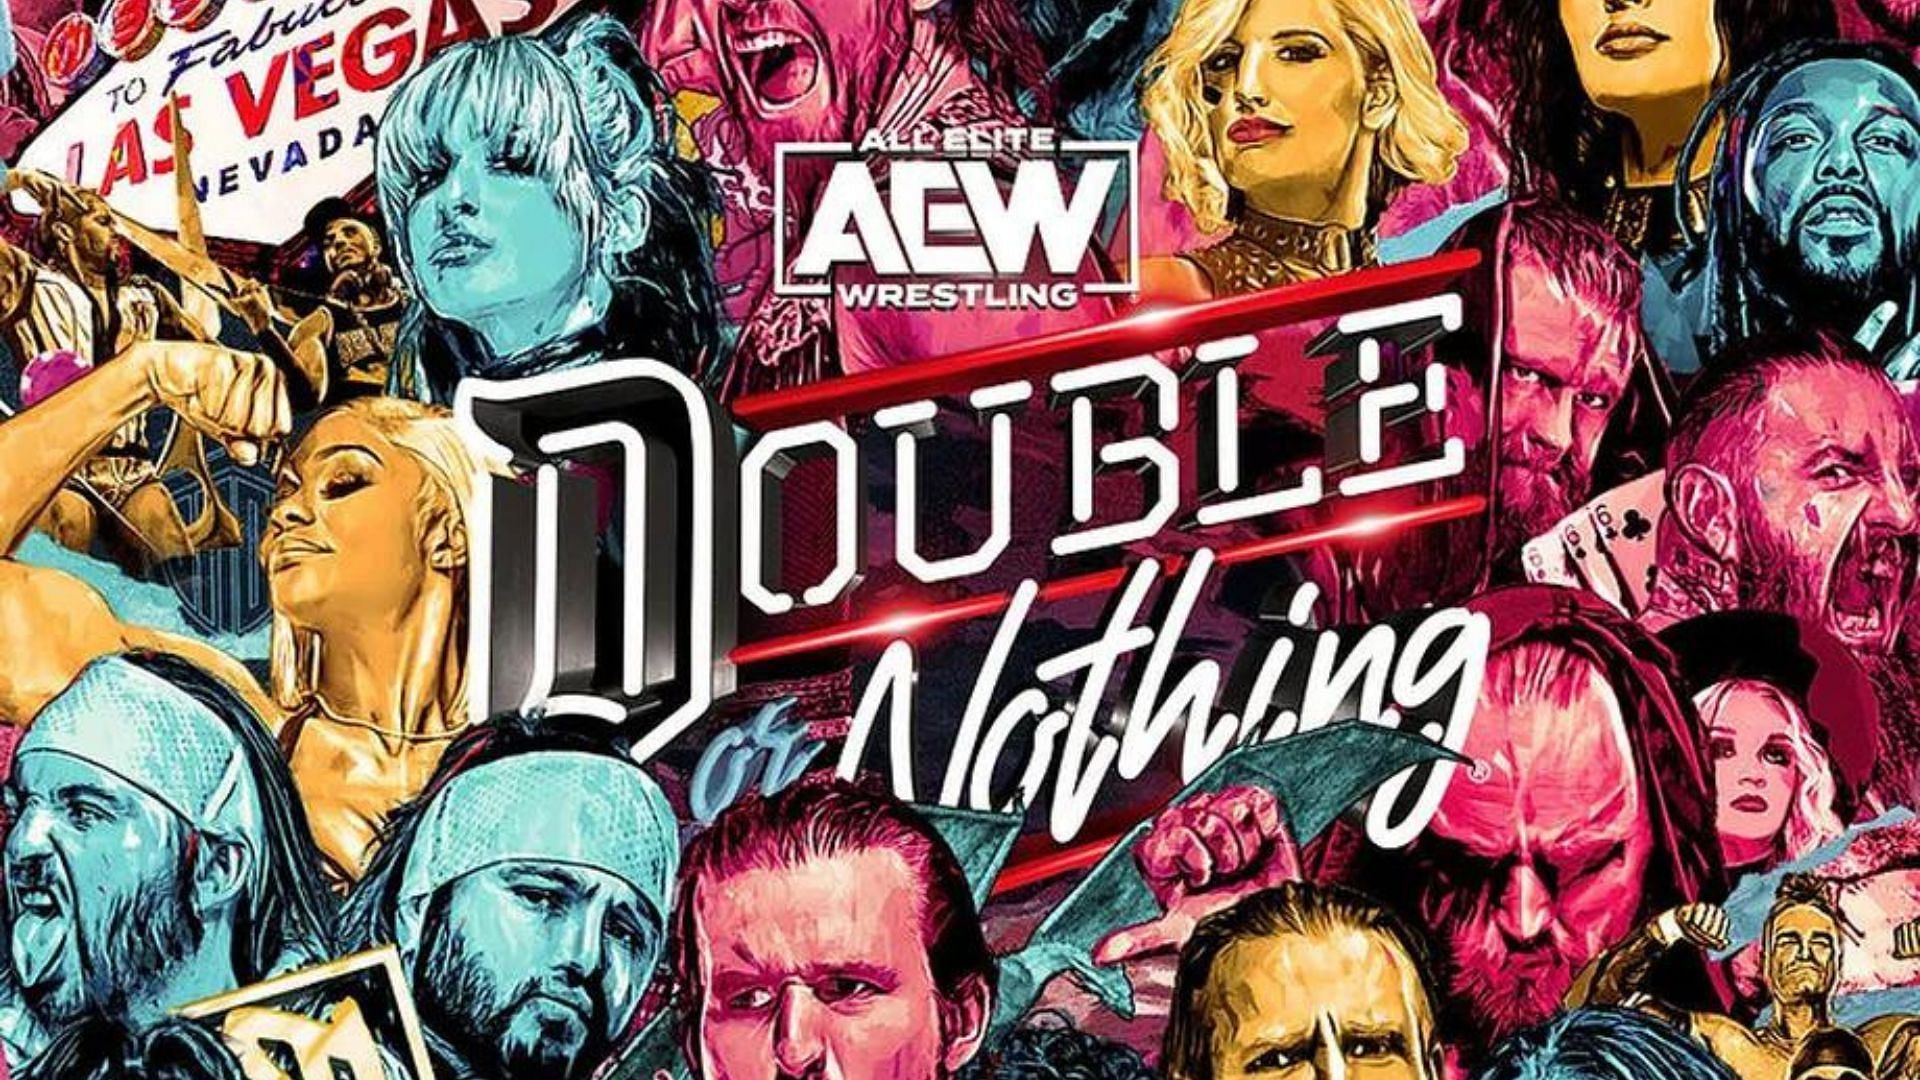 Which champion suffered an injury at AEW Double or Nothing?